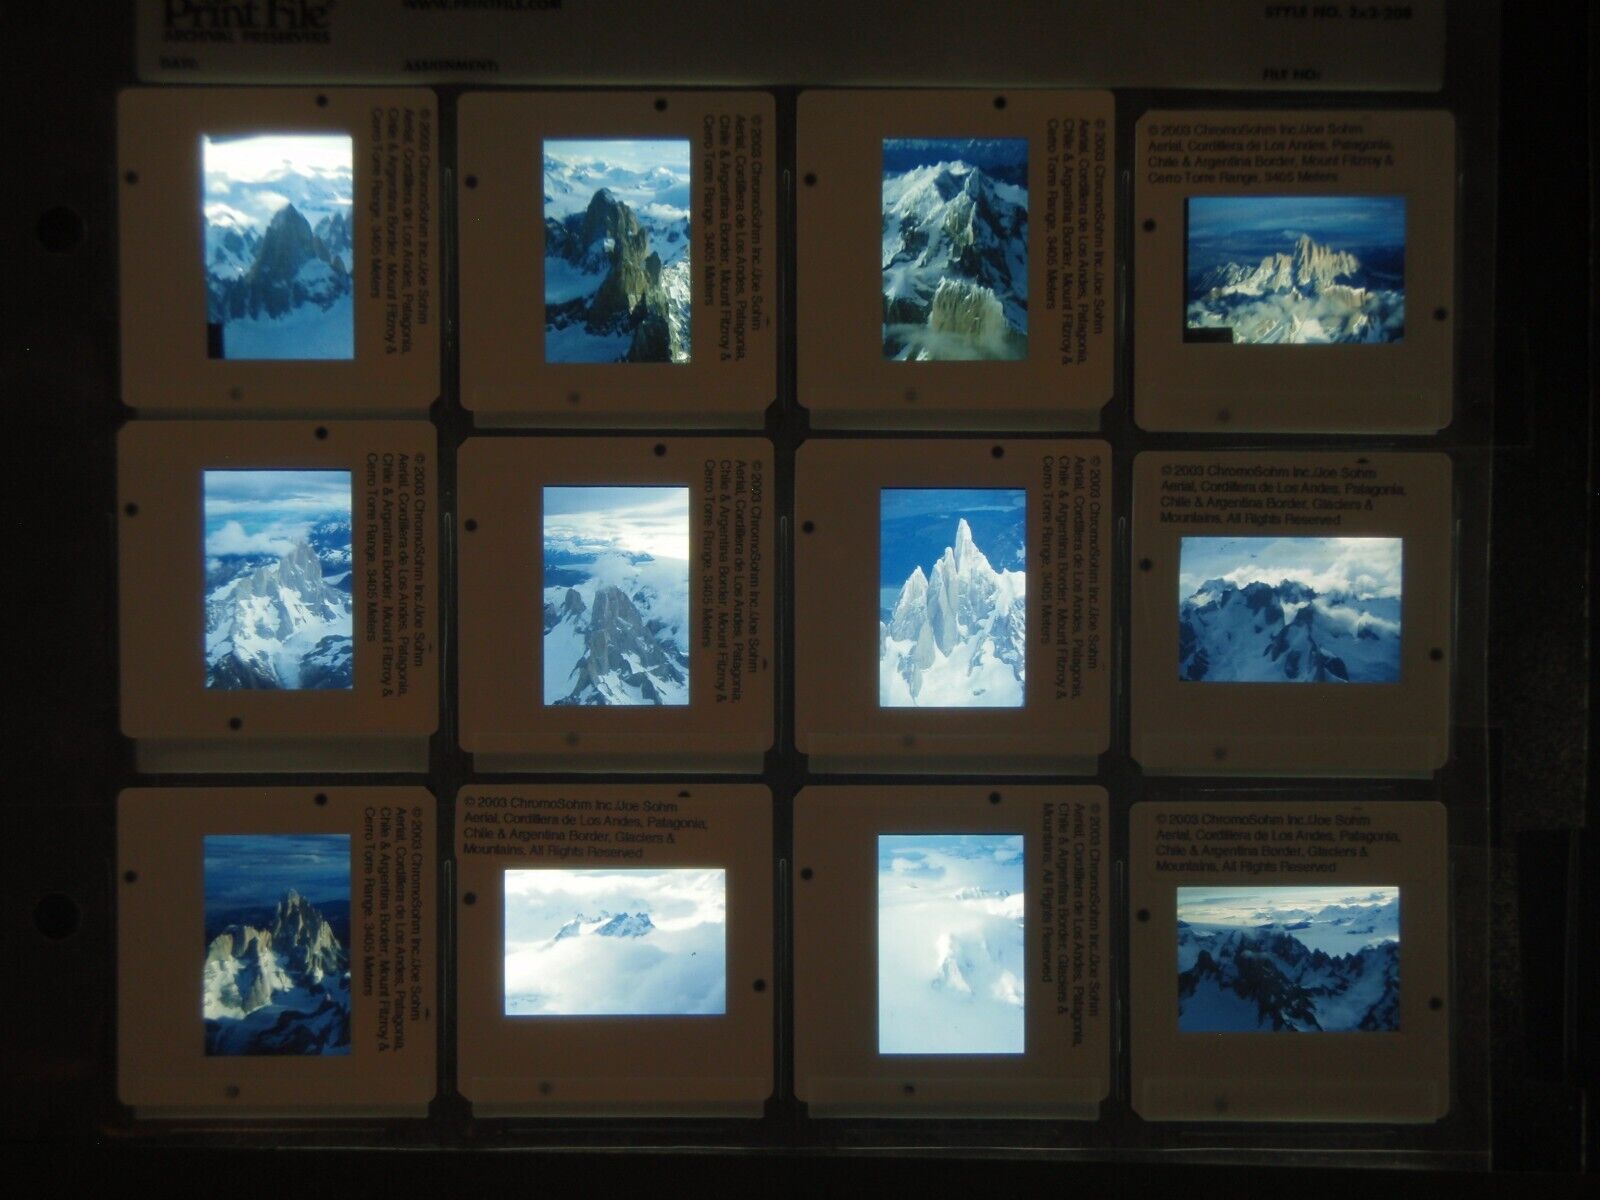 CHILI & ARGENTINA * 48 Slides + 6 Larger * Patagonia Andes Mountains Glaciers